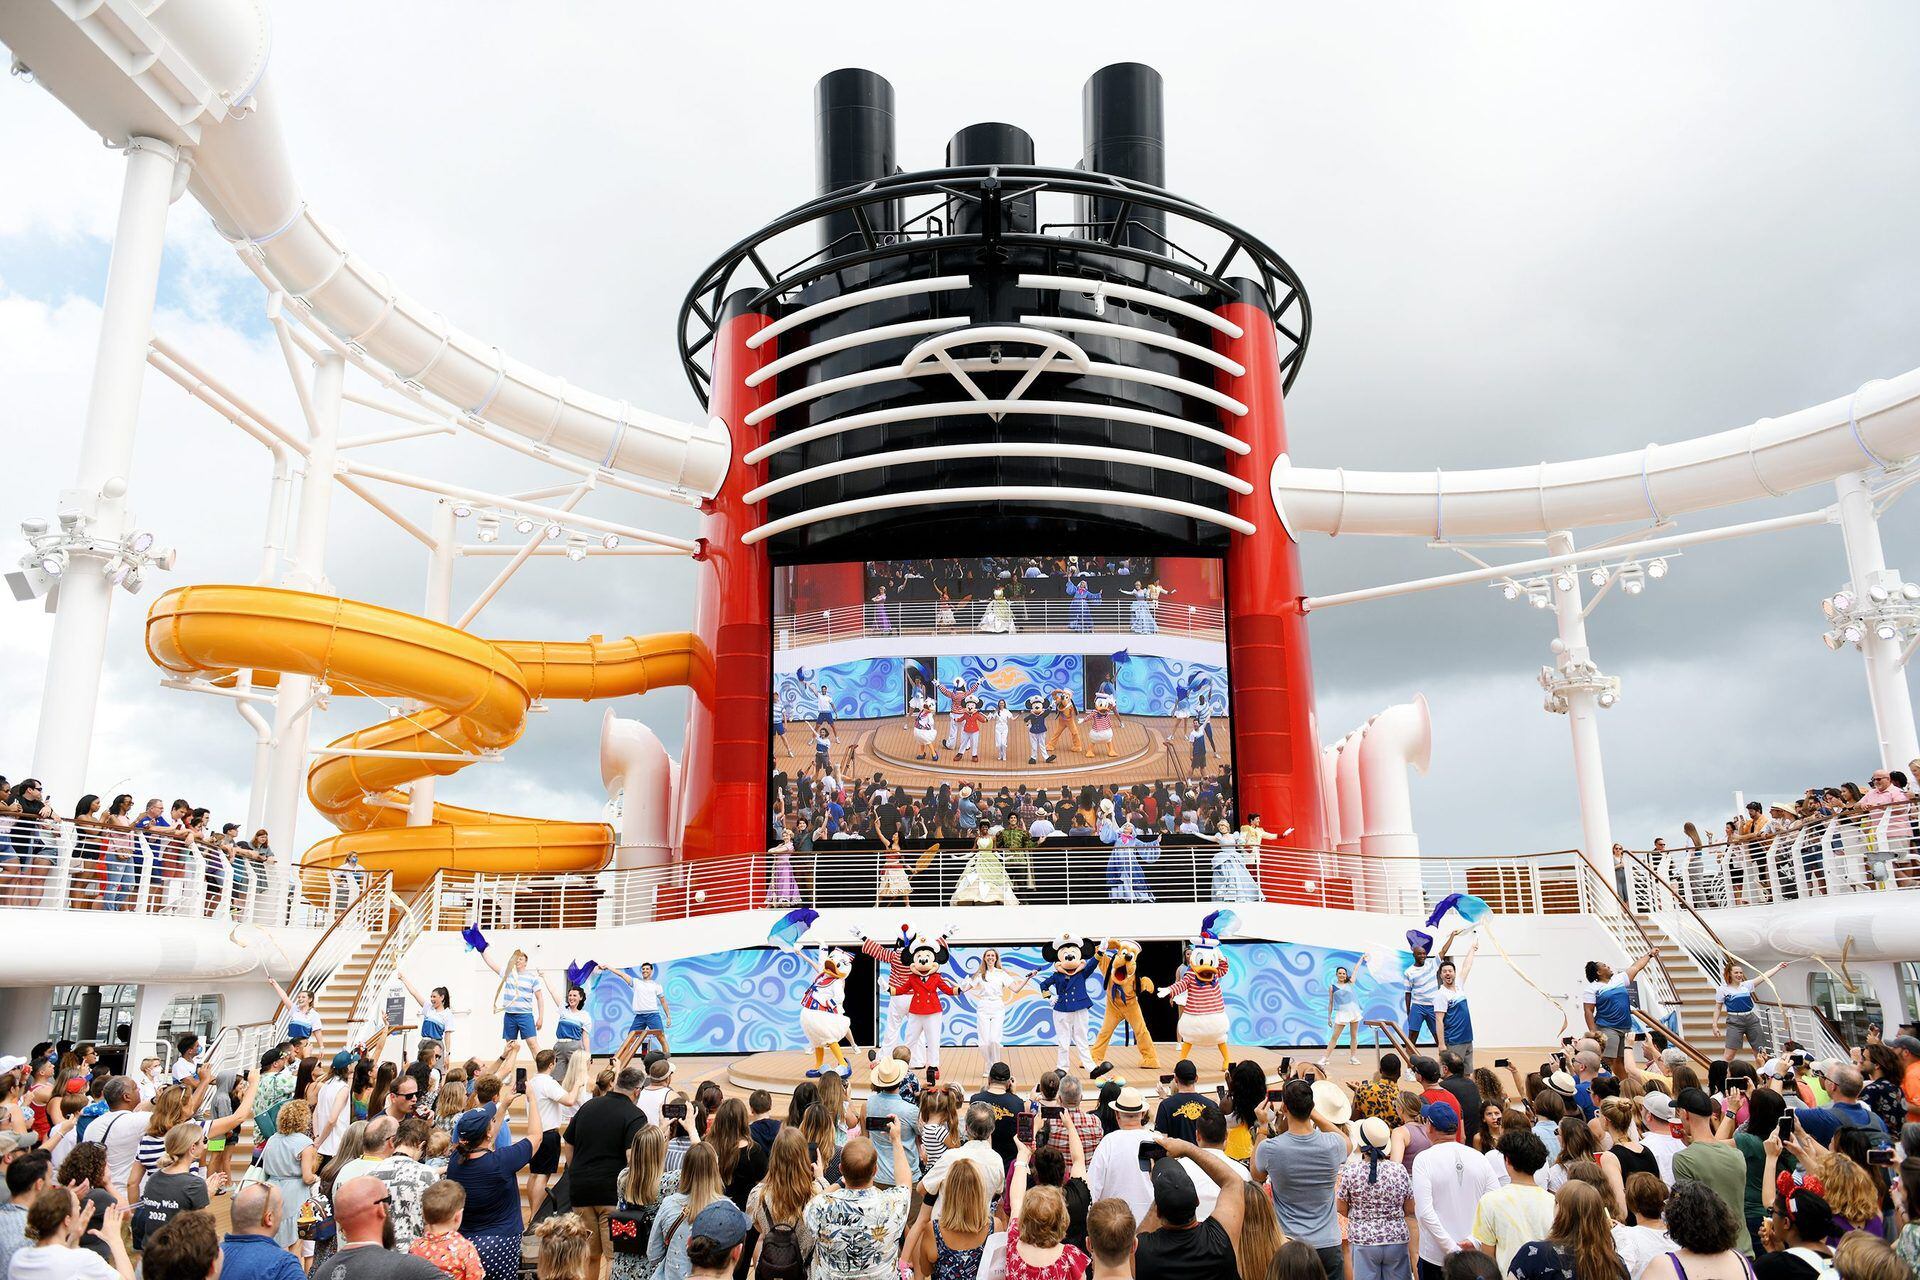 Cruise Holidays What It S Like On Board Disney Wish The Family Friendly New Ship Nz Herald